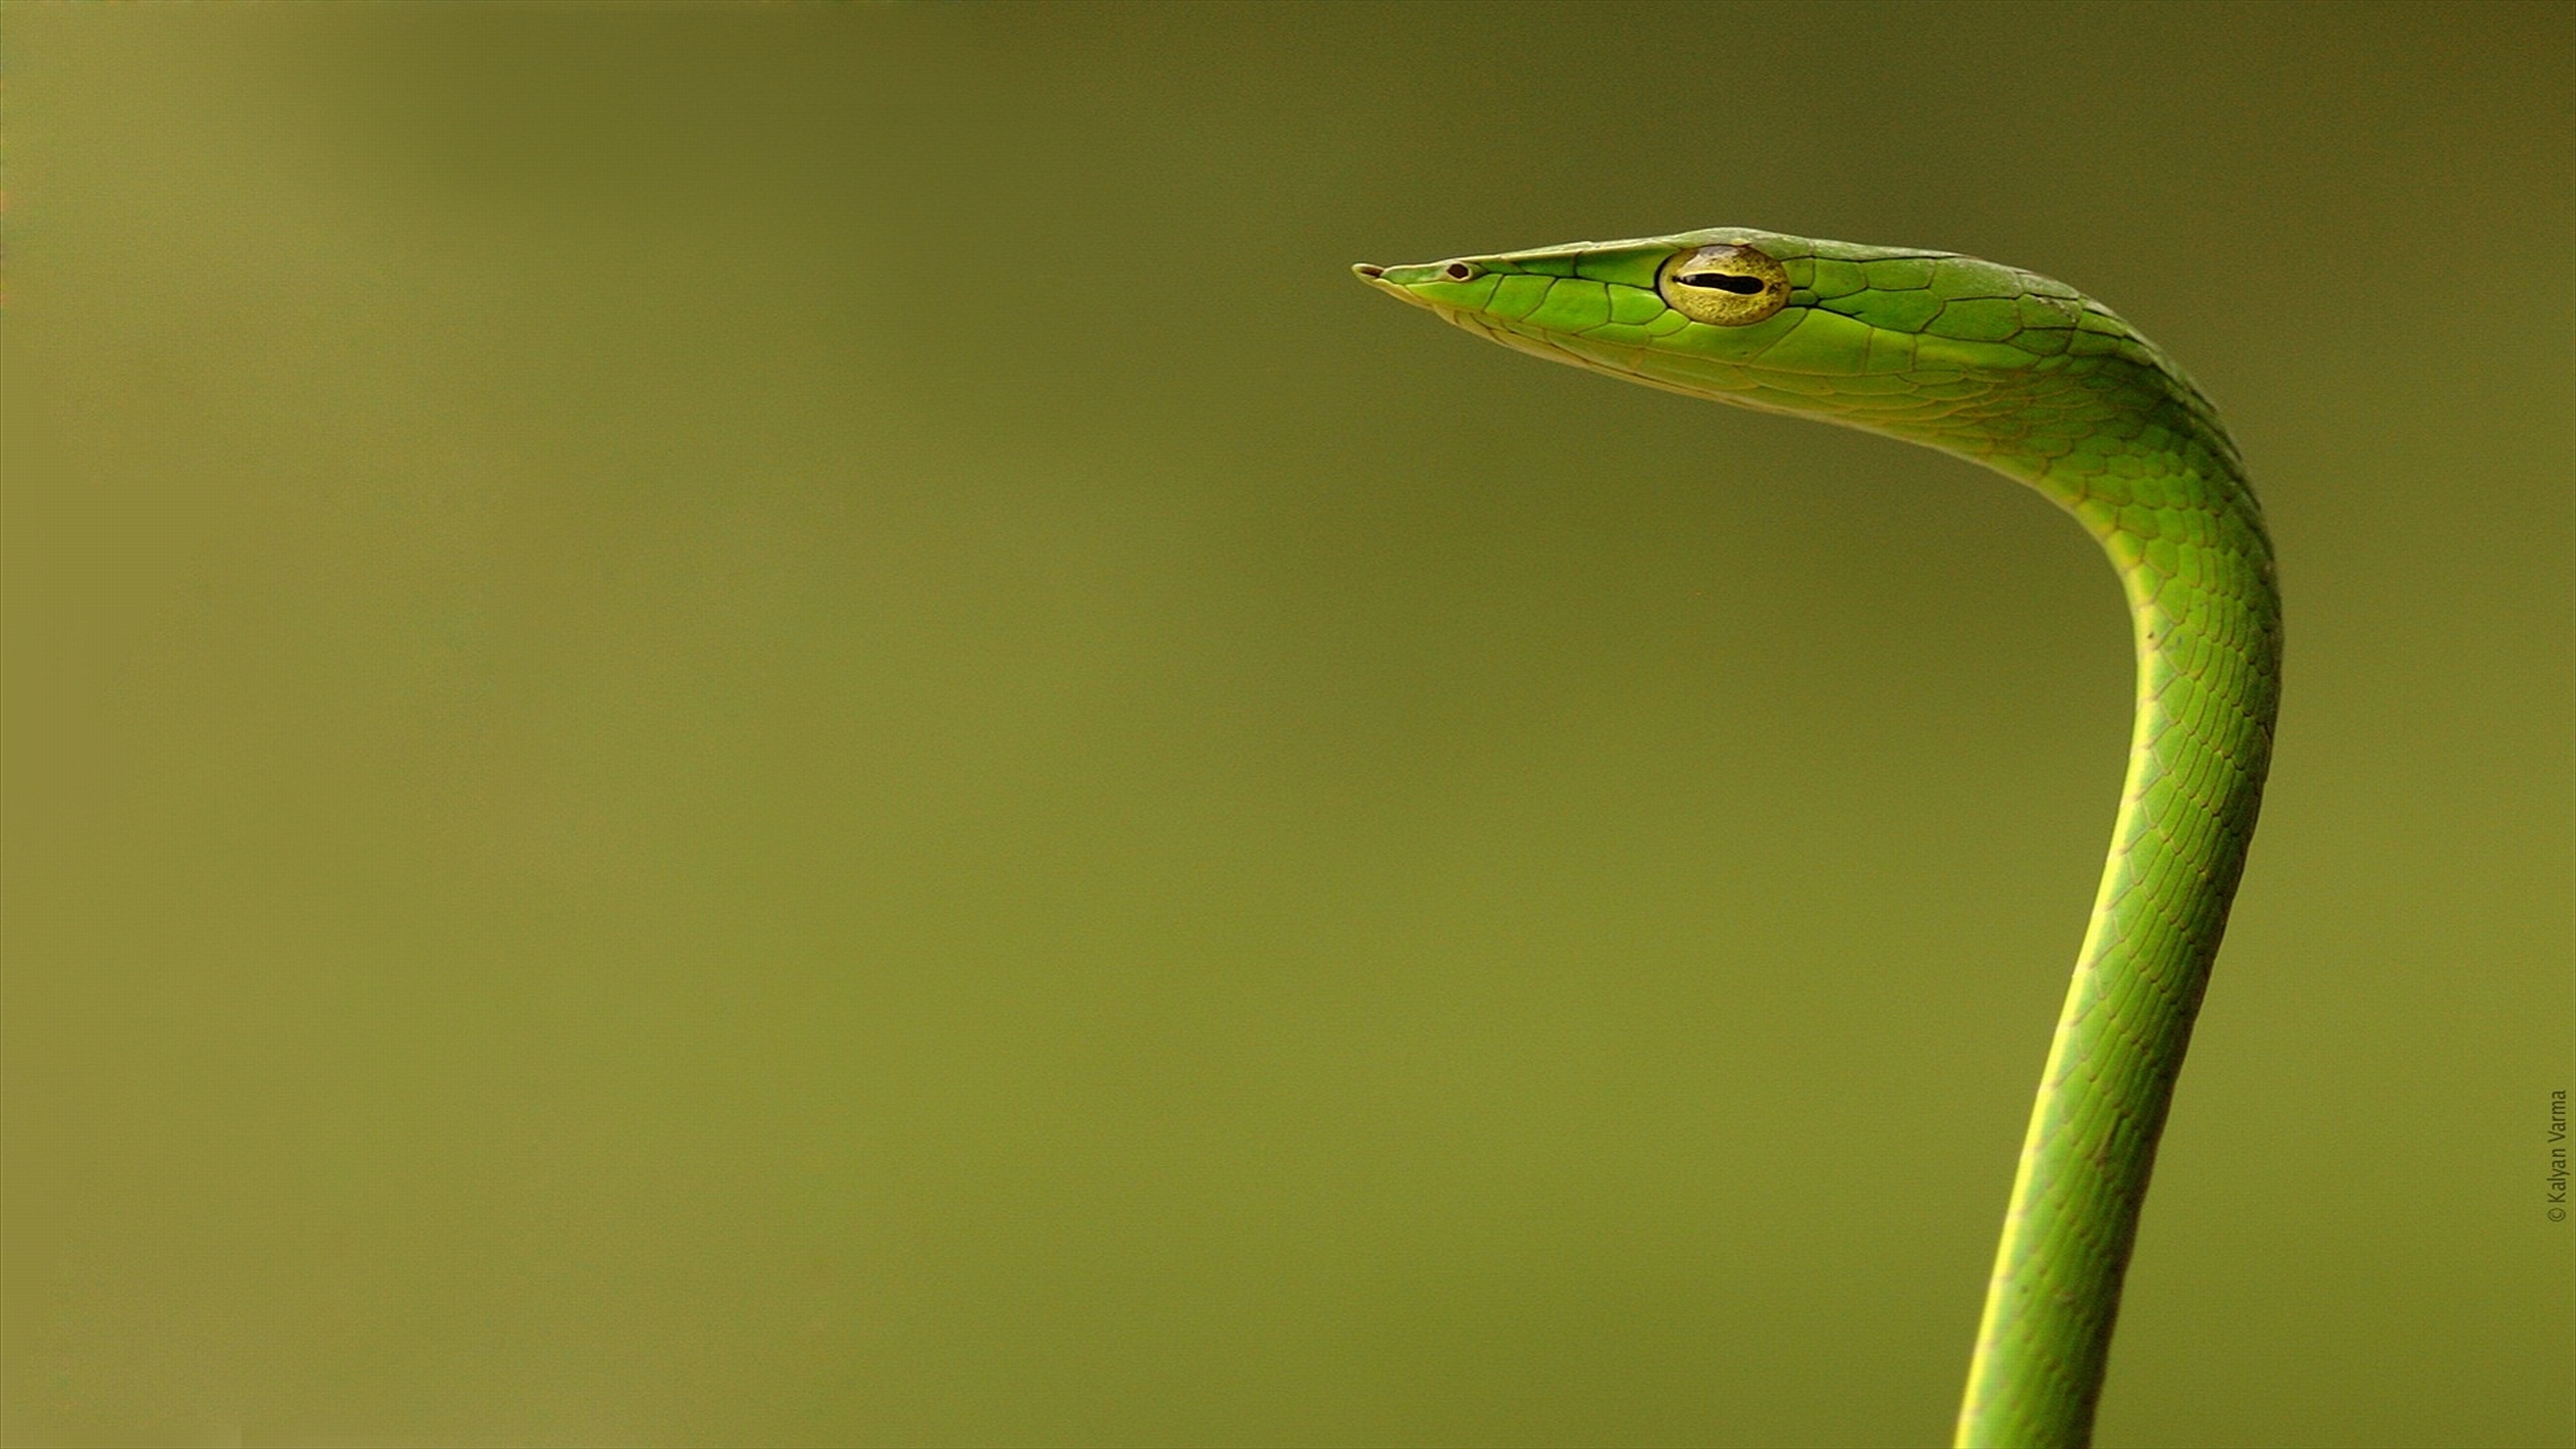 Green Whip Snake slithers through lush foliage, showcasing its vibrant scales.